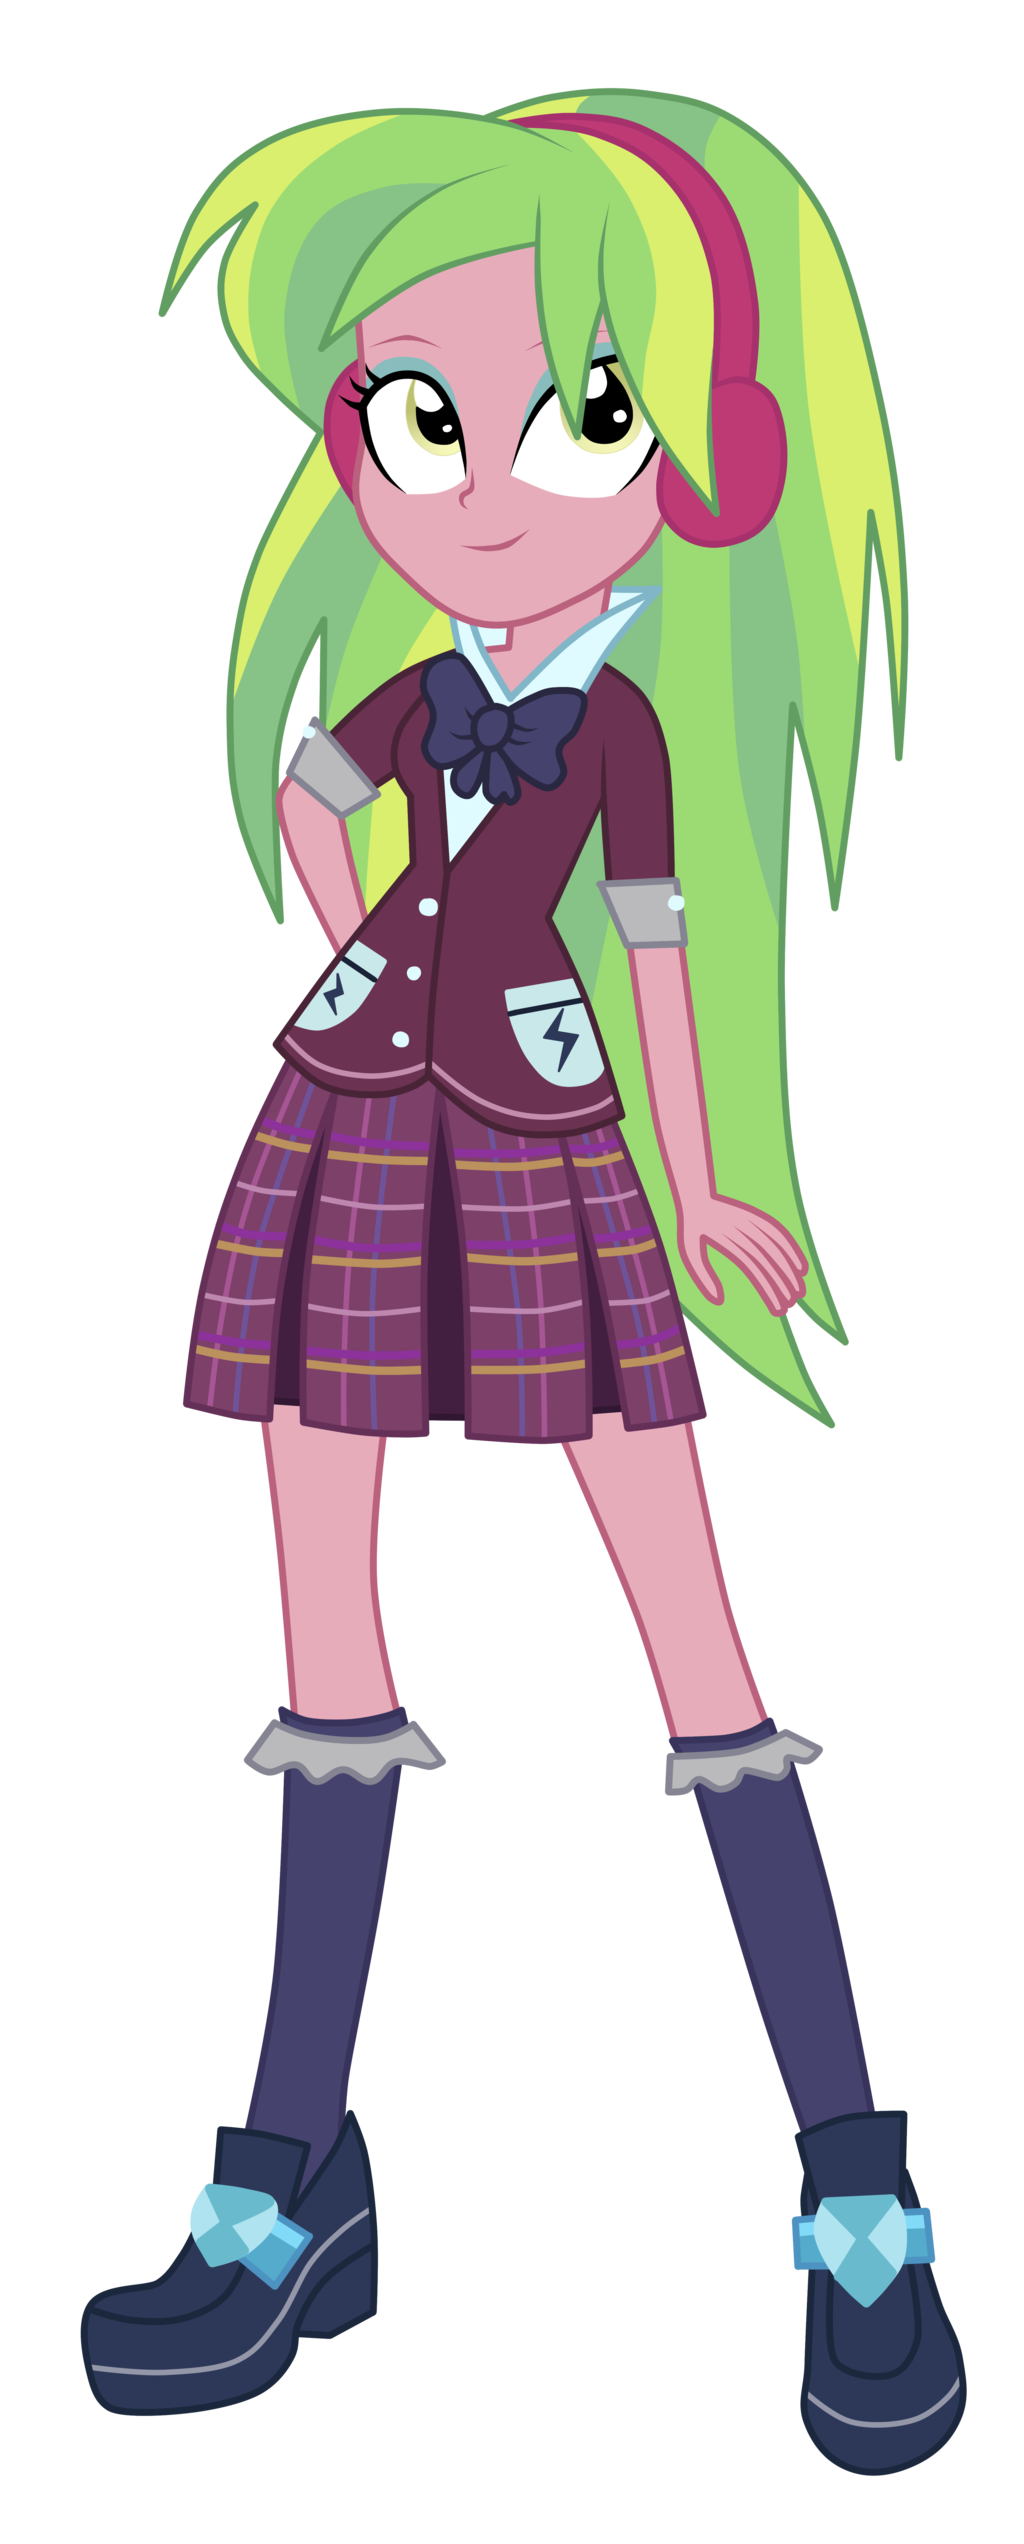 Best The Shadowbolts Image Equestria Girls Friendship Games